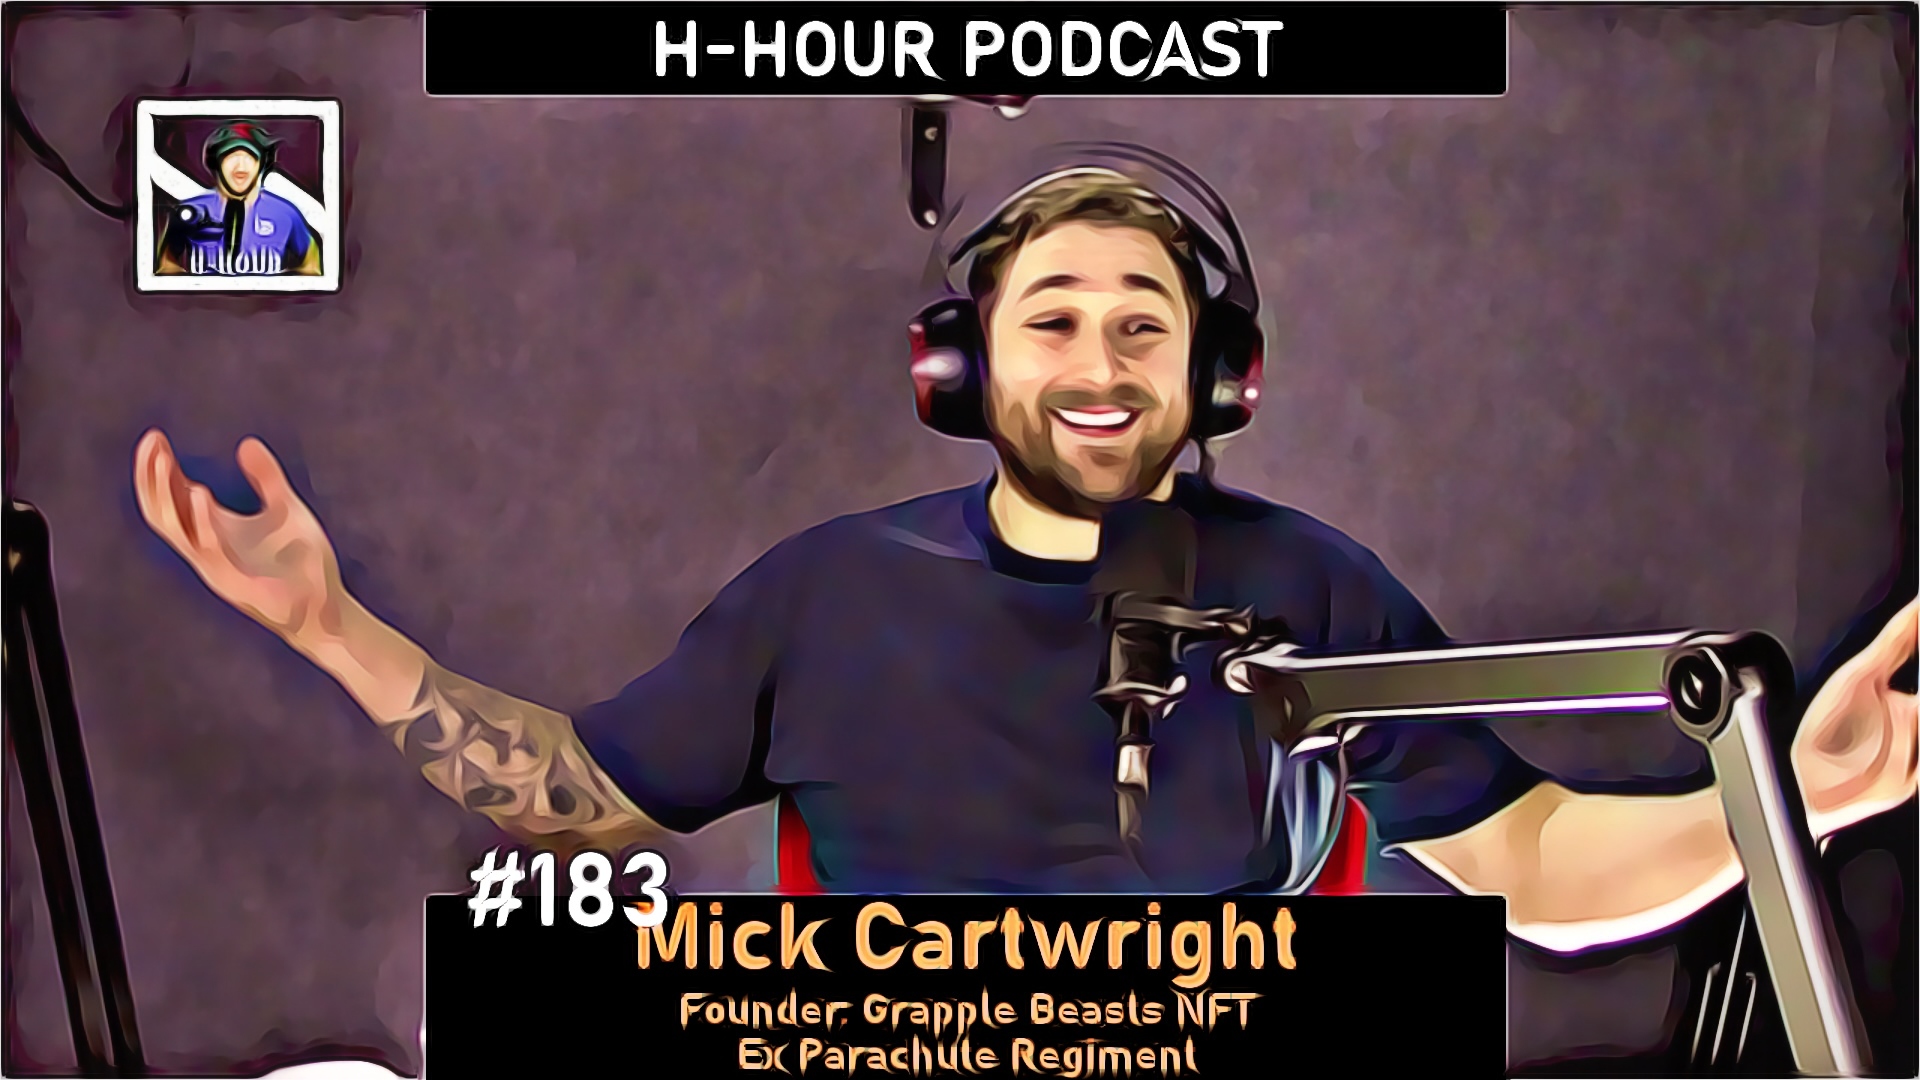 h-hour Podcast nft #183 mick cartwright cover image